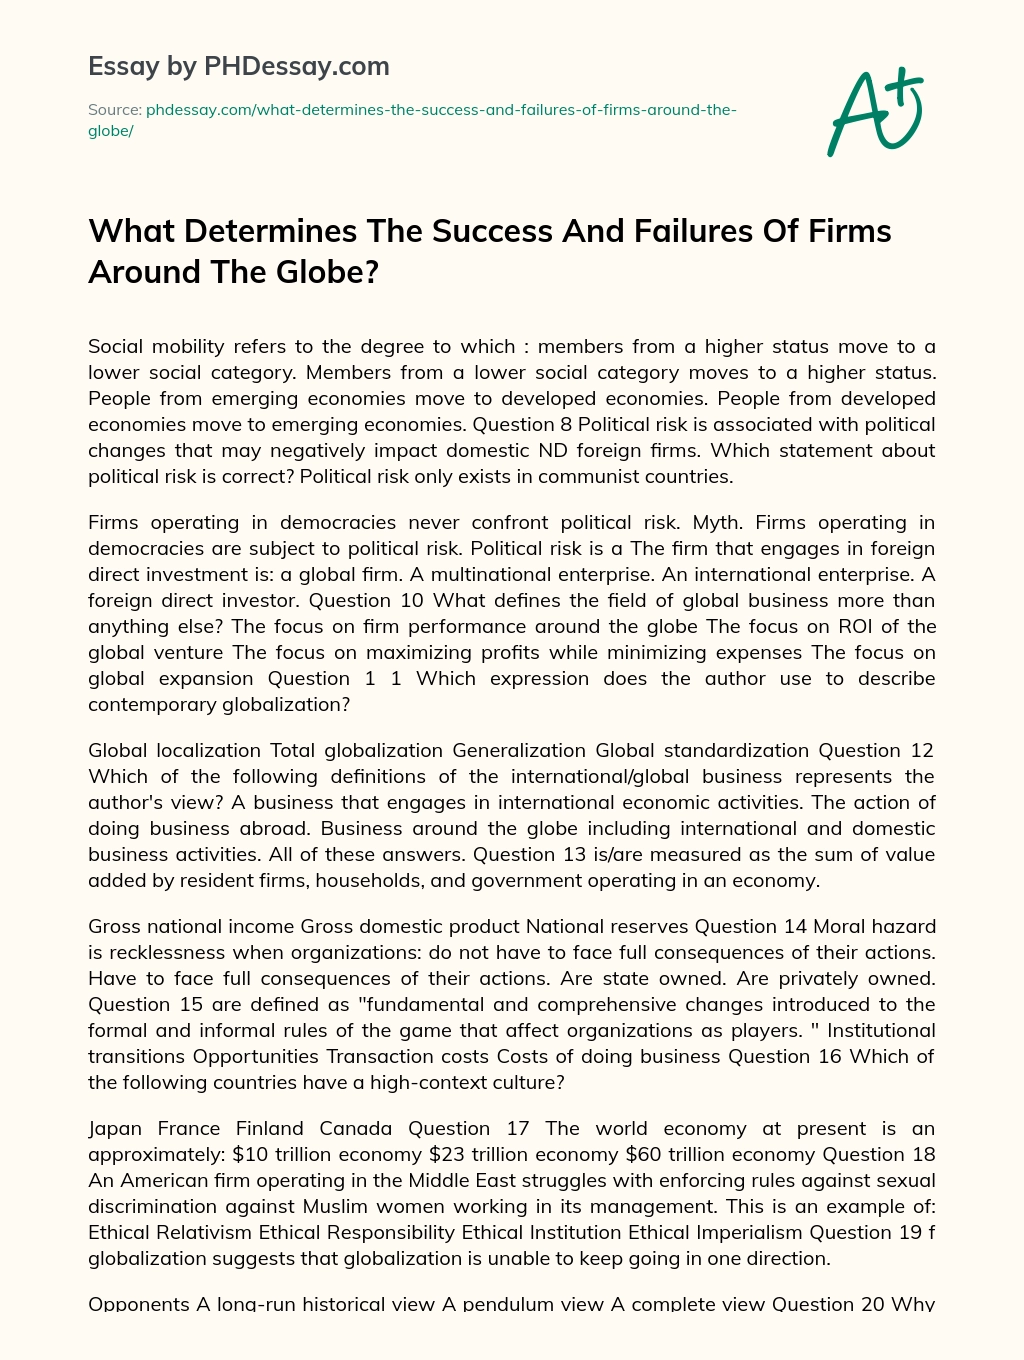 What Determines The Success And Failures Of Firms Around The Globe? essay